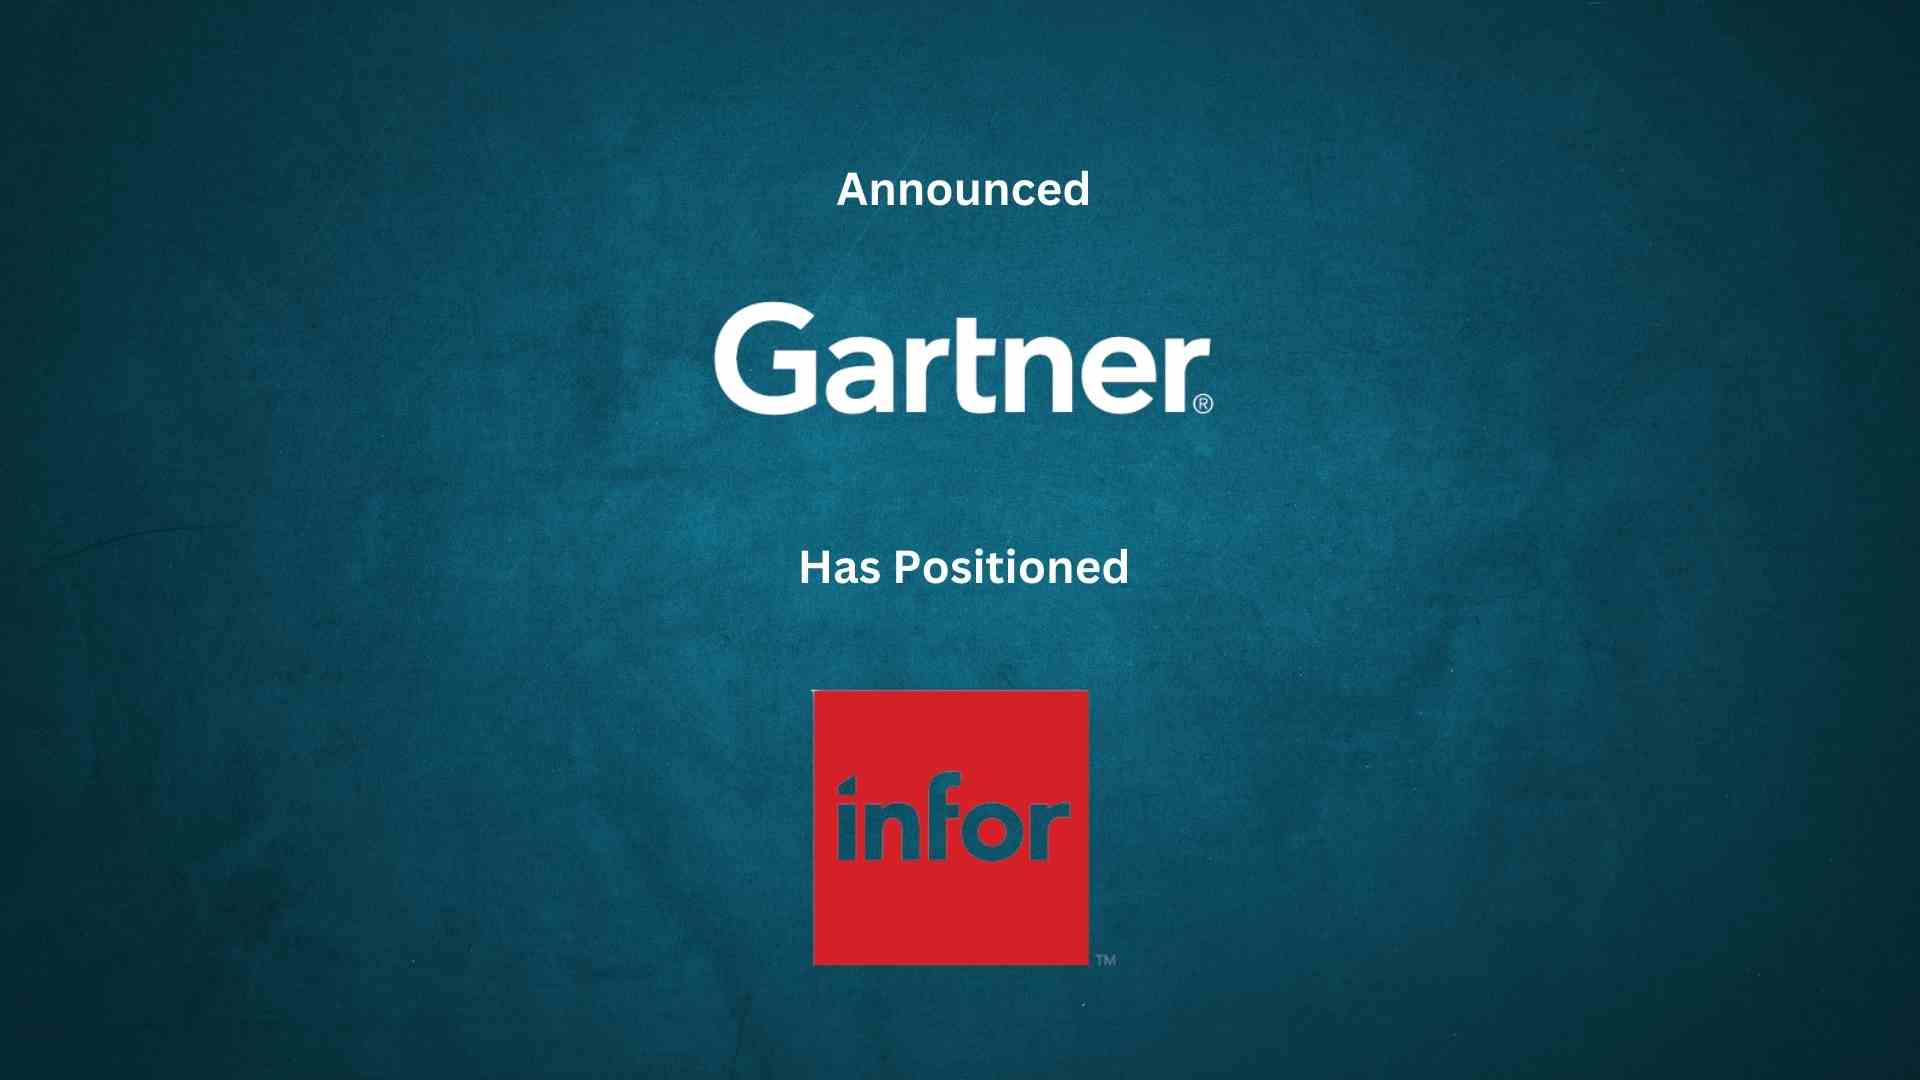 Infor Positioned, for the Third Consecutive Time, as a Leader in the 2023 Gartner Magic Quadrant for Cloud ERP for Product-Centric Enterprises